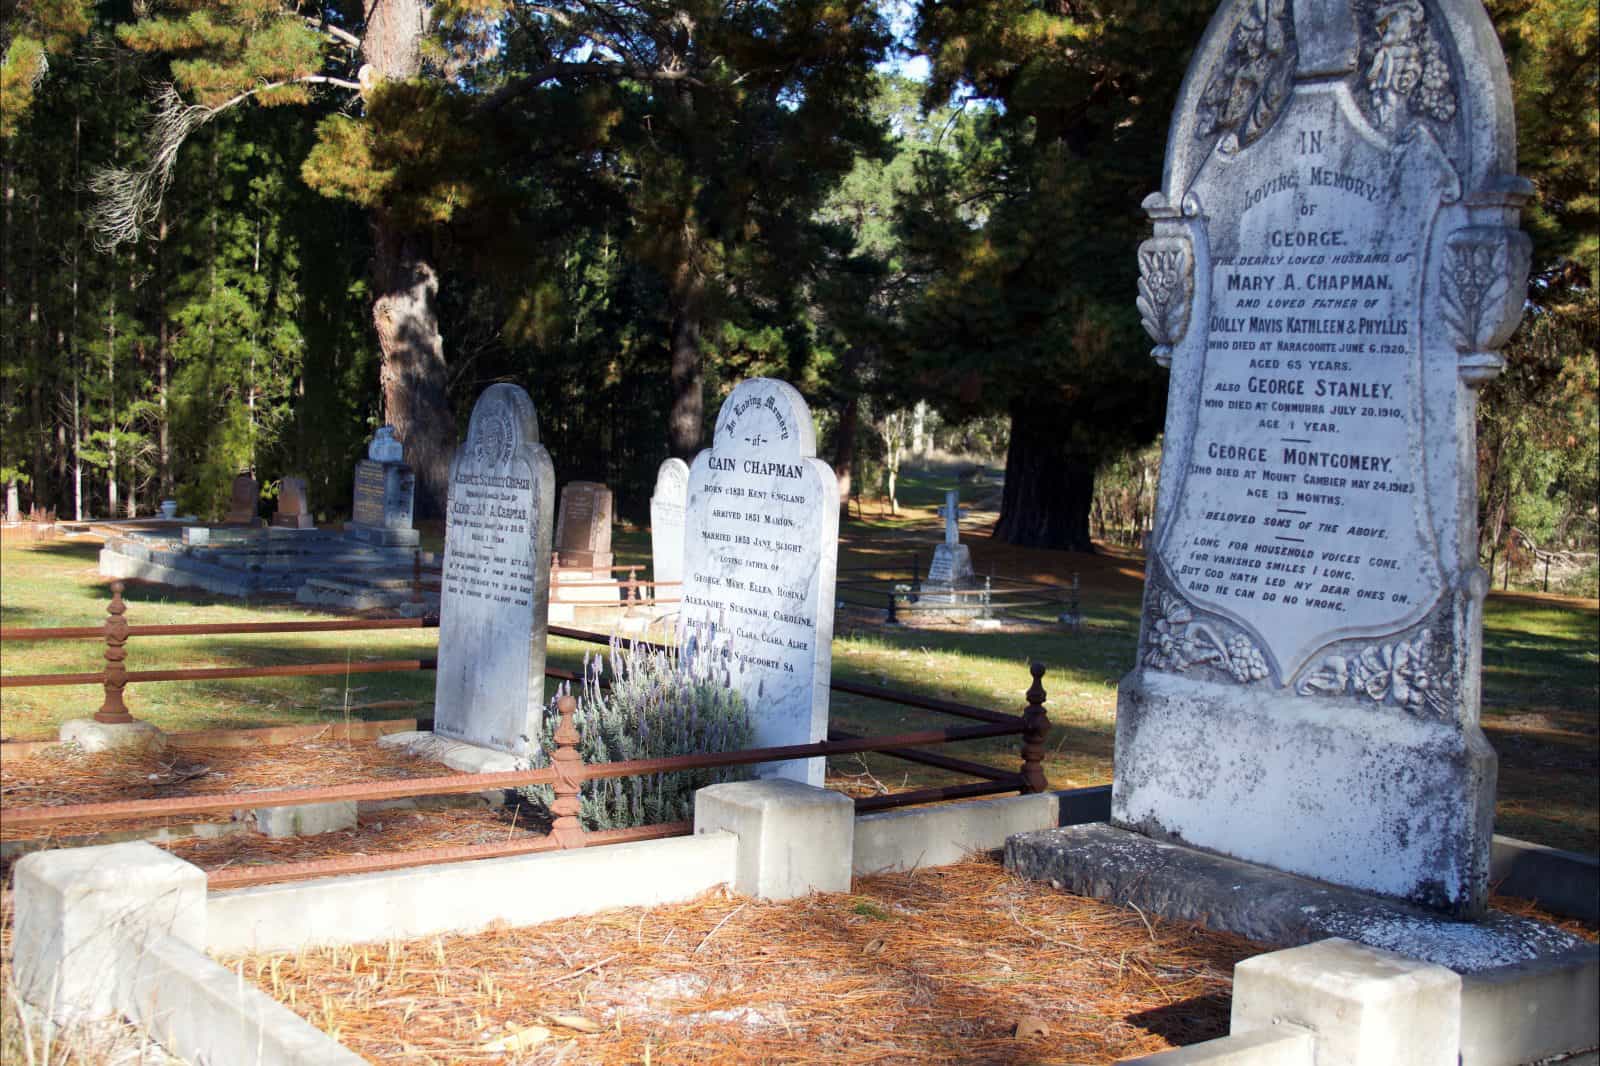 Historic gravestones from bygone times are a fascinating feature of the Lucindale Cemetery.